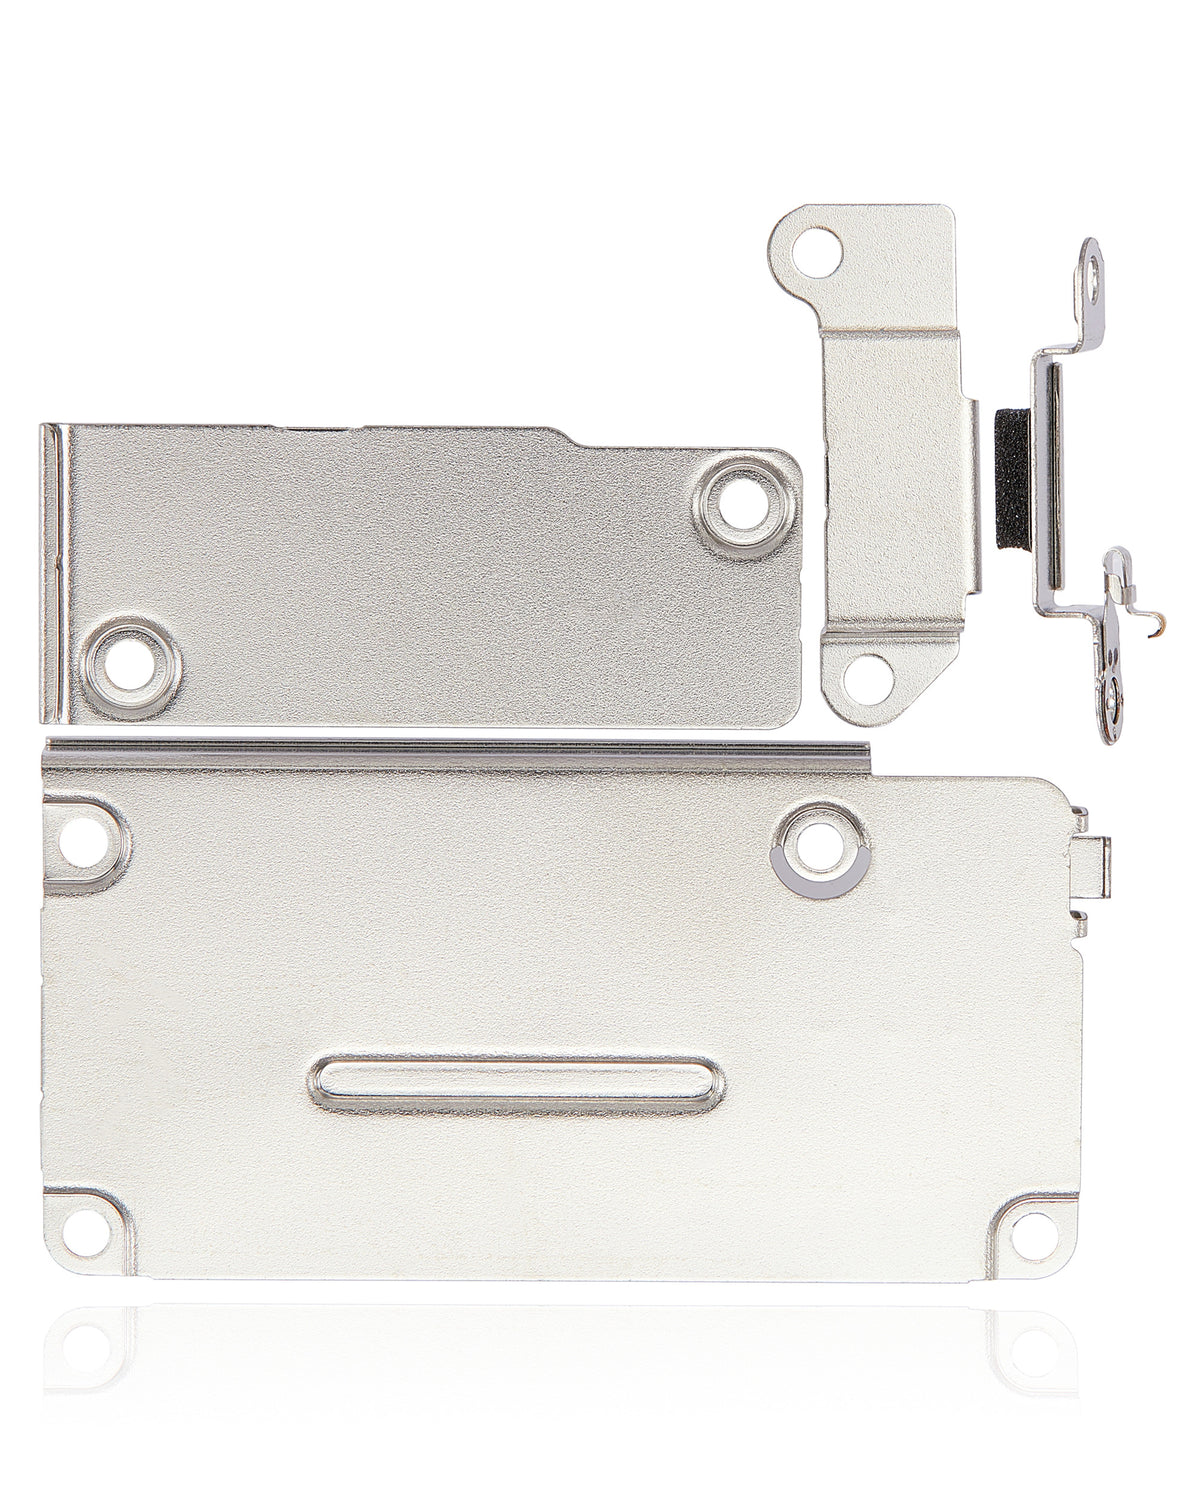 SMALL METAL BRACKET (ON MOTHERBOARD) COMPATIBLE WITH IPHONE 12 / 12 PRO